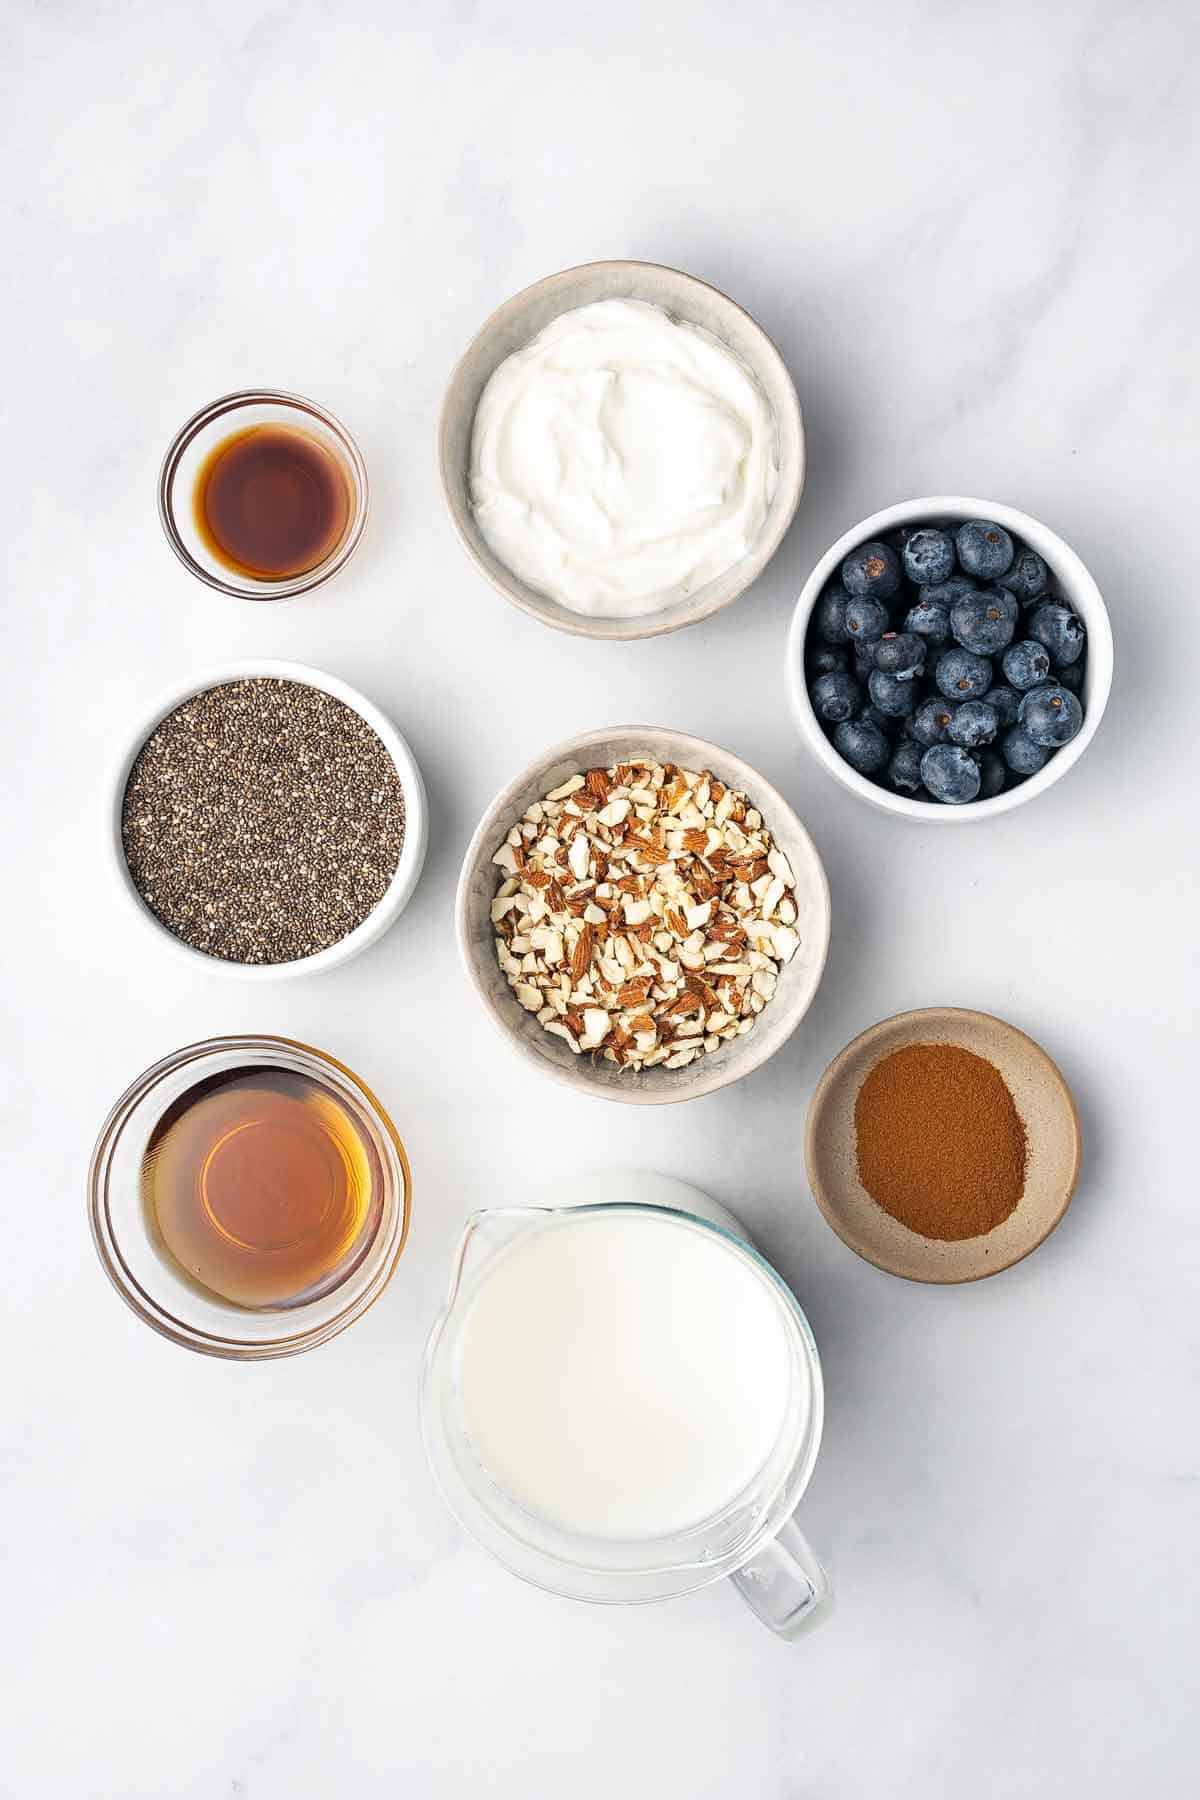 Ingredients needed to make warm chia pudding.